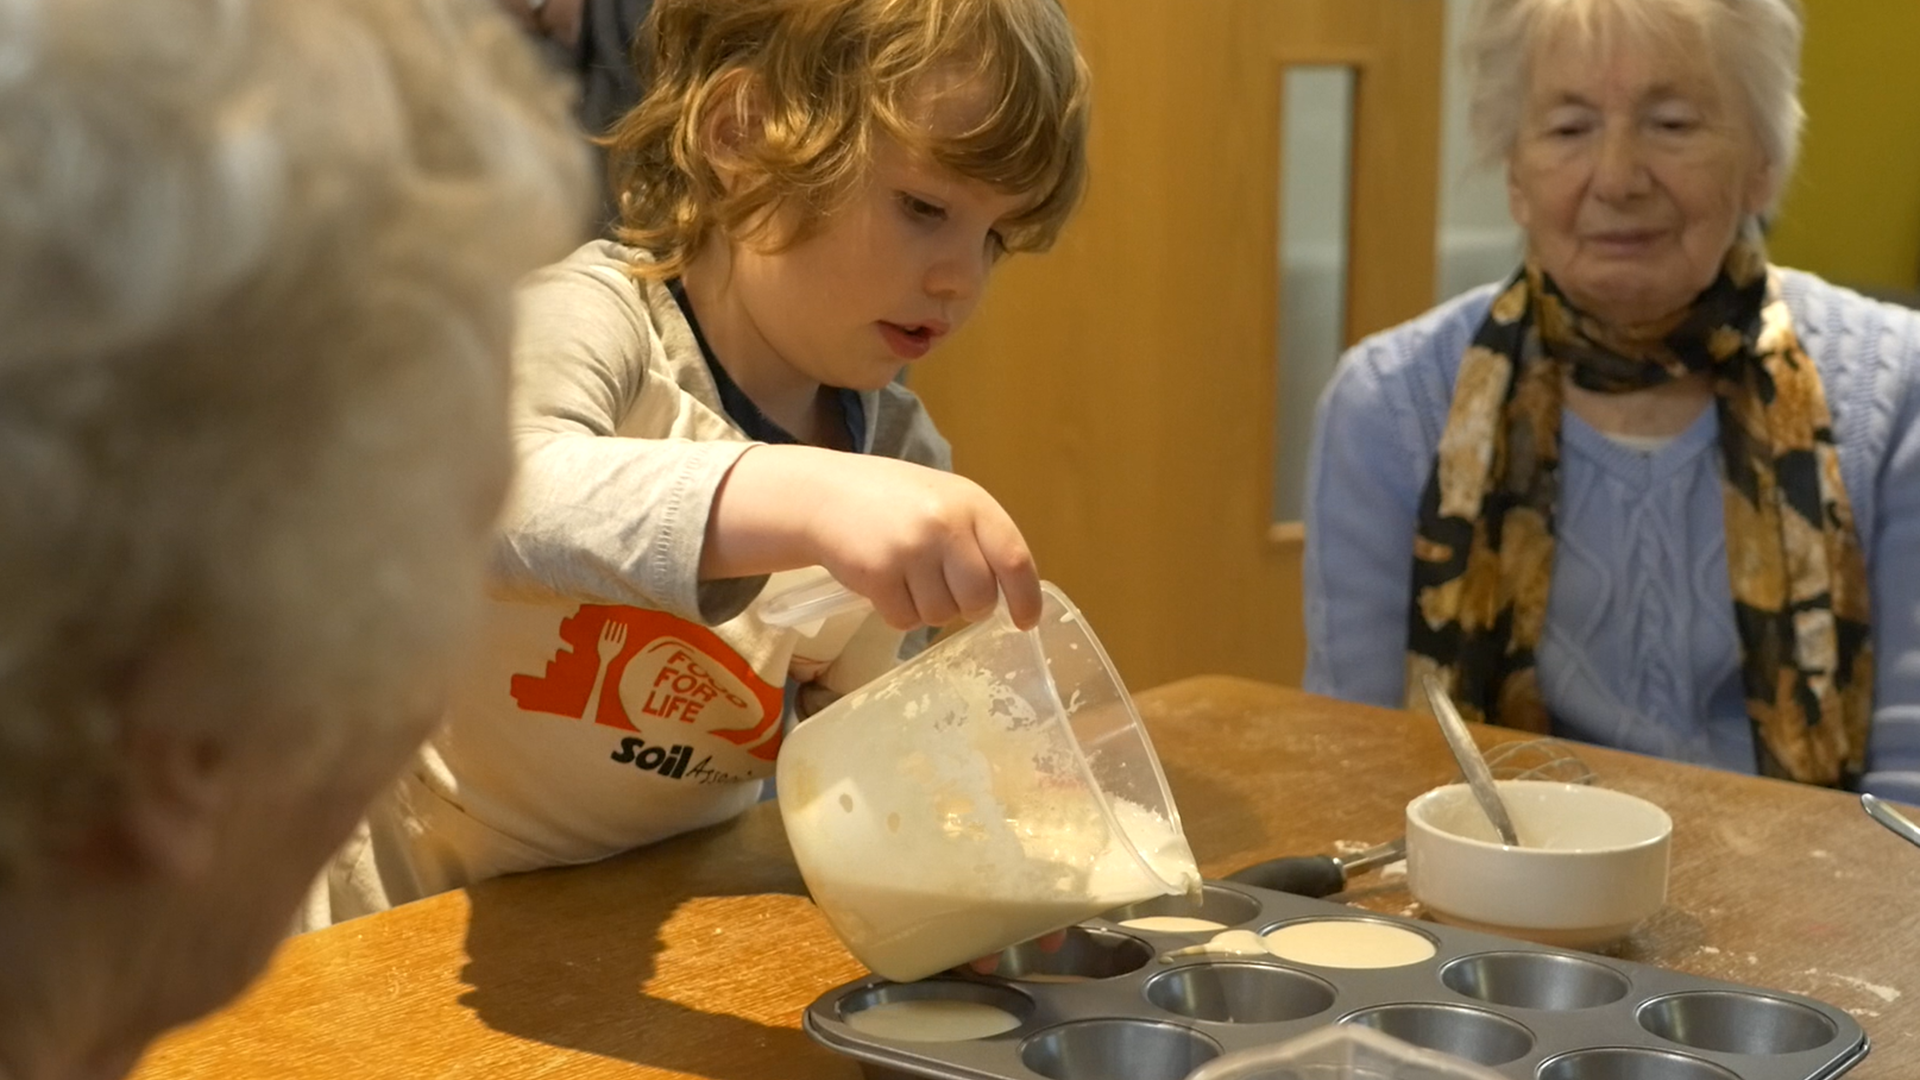 Older woman looks on as an early years child pours batter into a baking tray